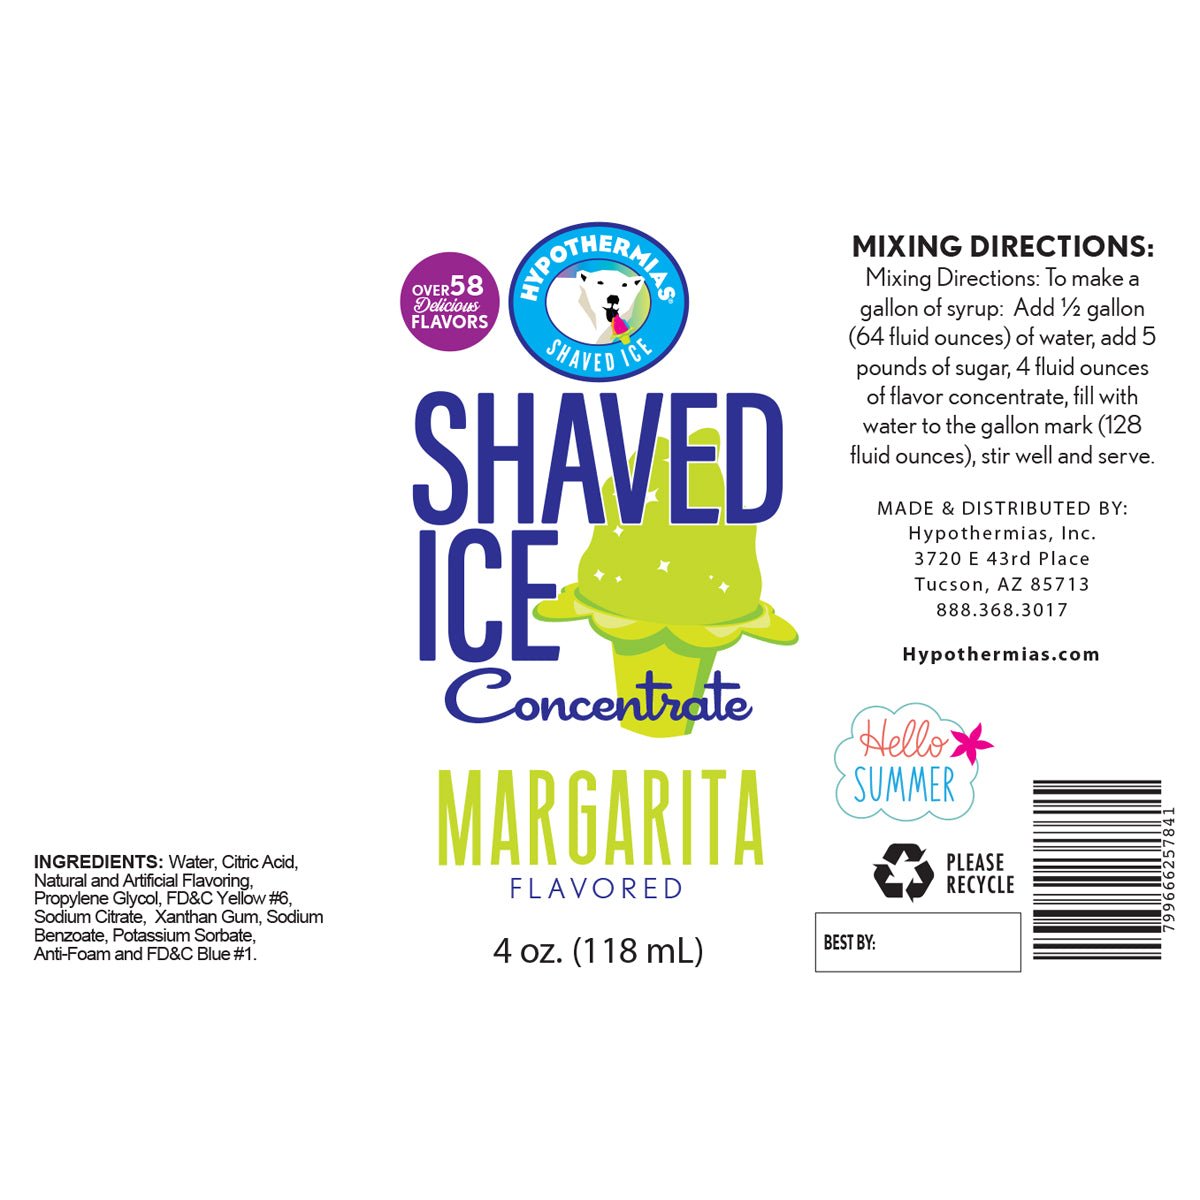 Hypothermias margarita shaved ice or snow cone flavor syrup concentrate ingredient label.